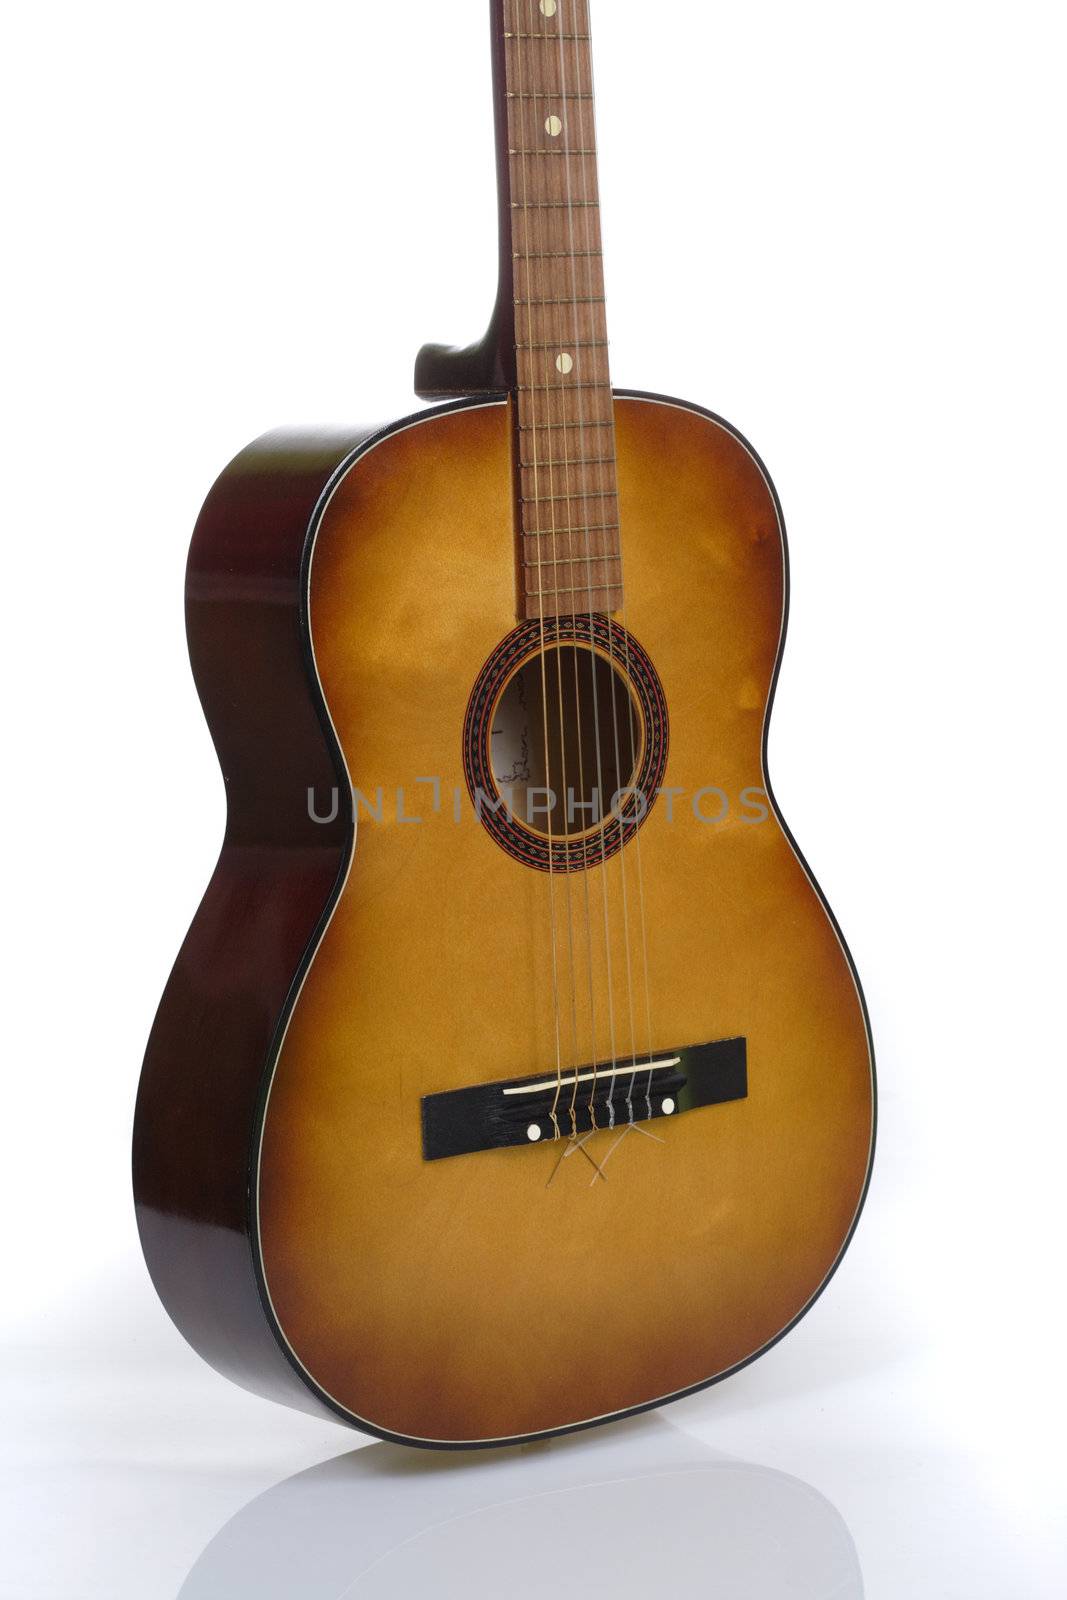 Guitar Acoustic photo on the white background